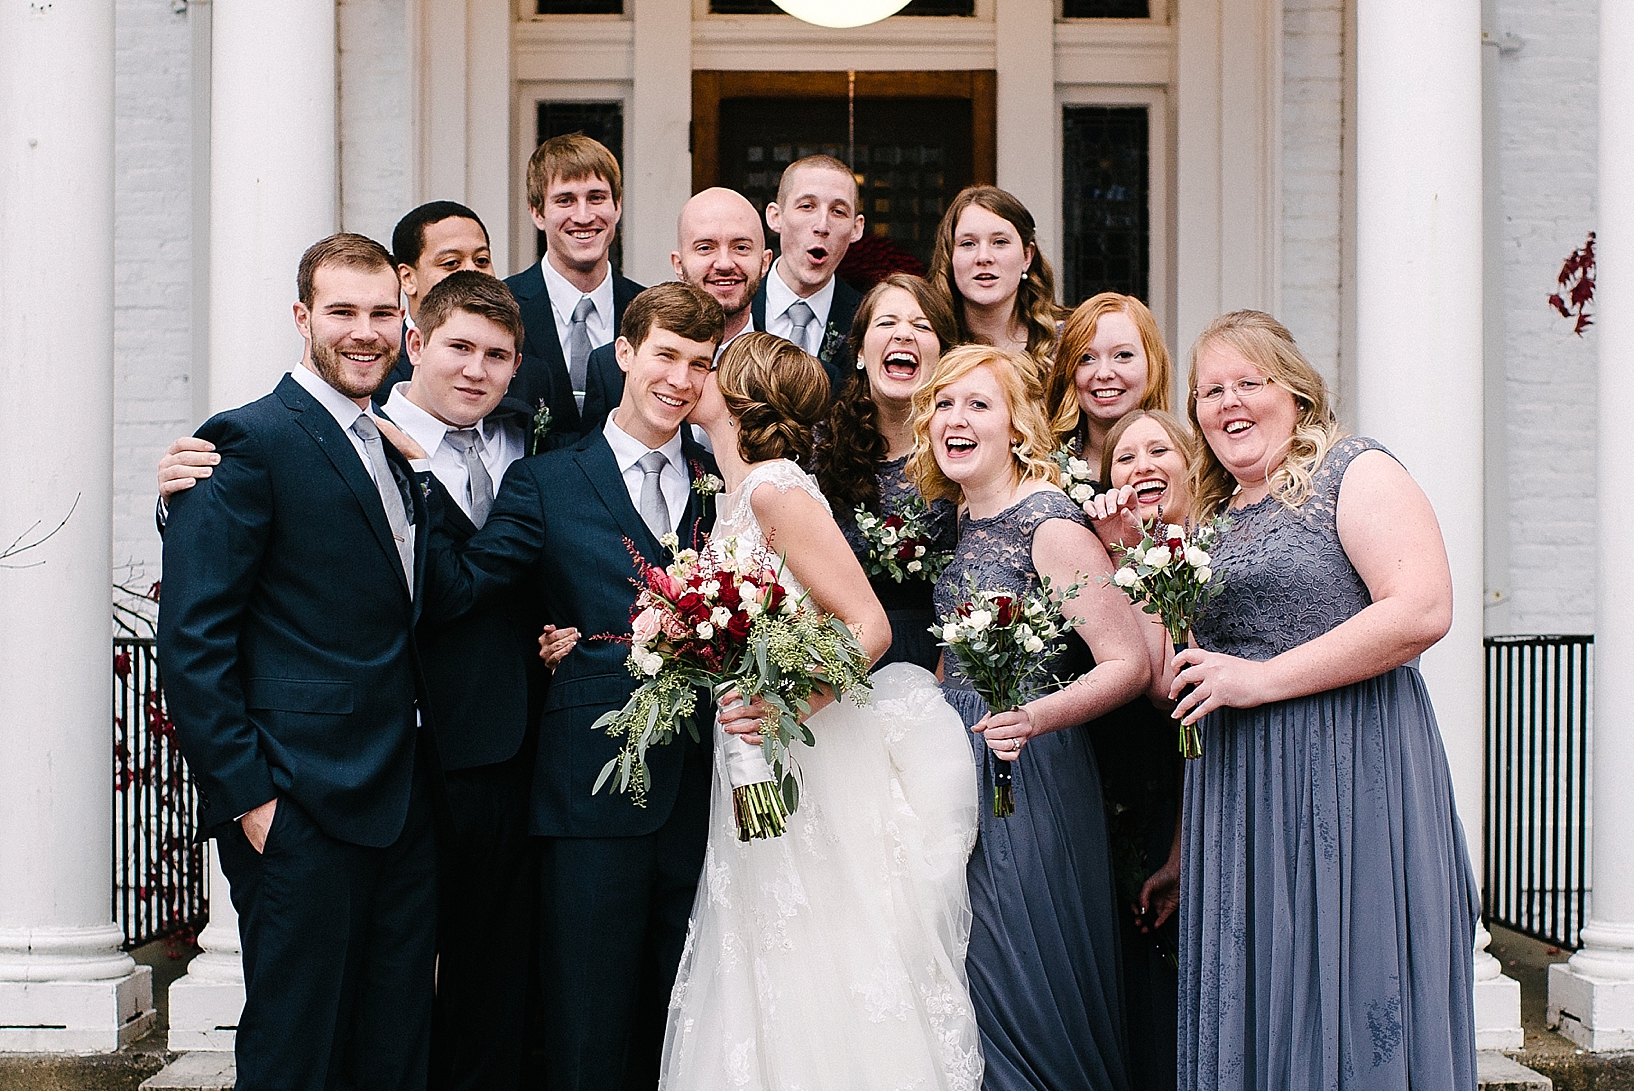 bridal party in navy and gray standing on steps of white house with pillars